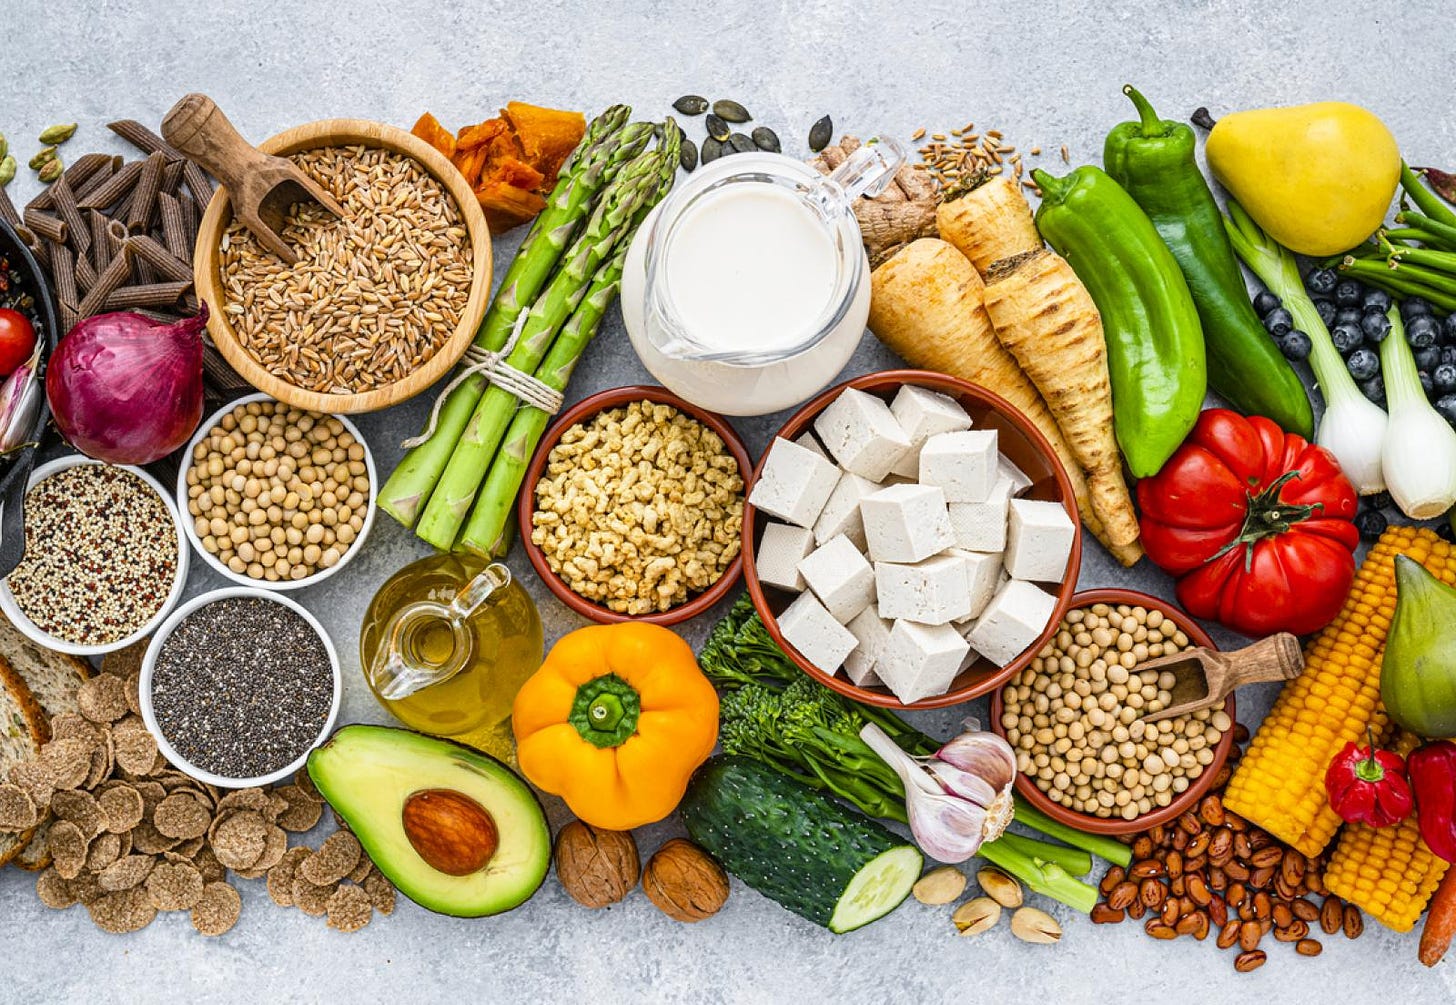 Veganism could save the NHS £6.7bn a year, new research suggests | UK Healthcare News